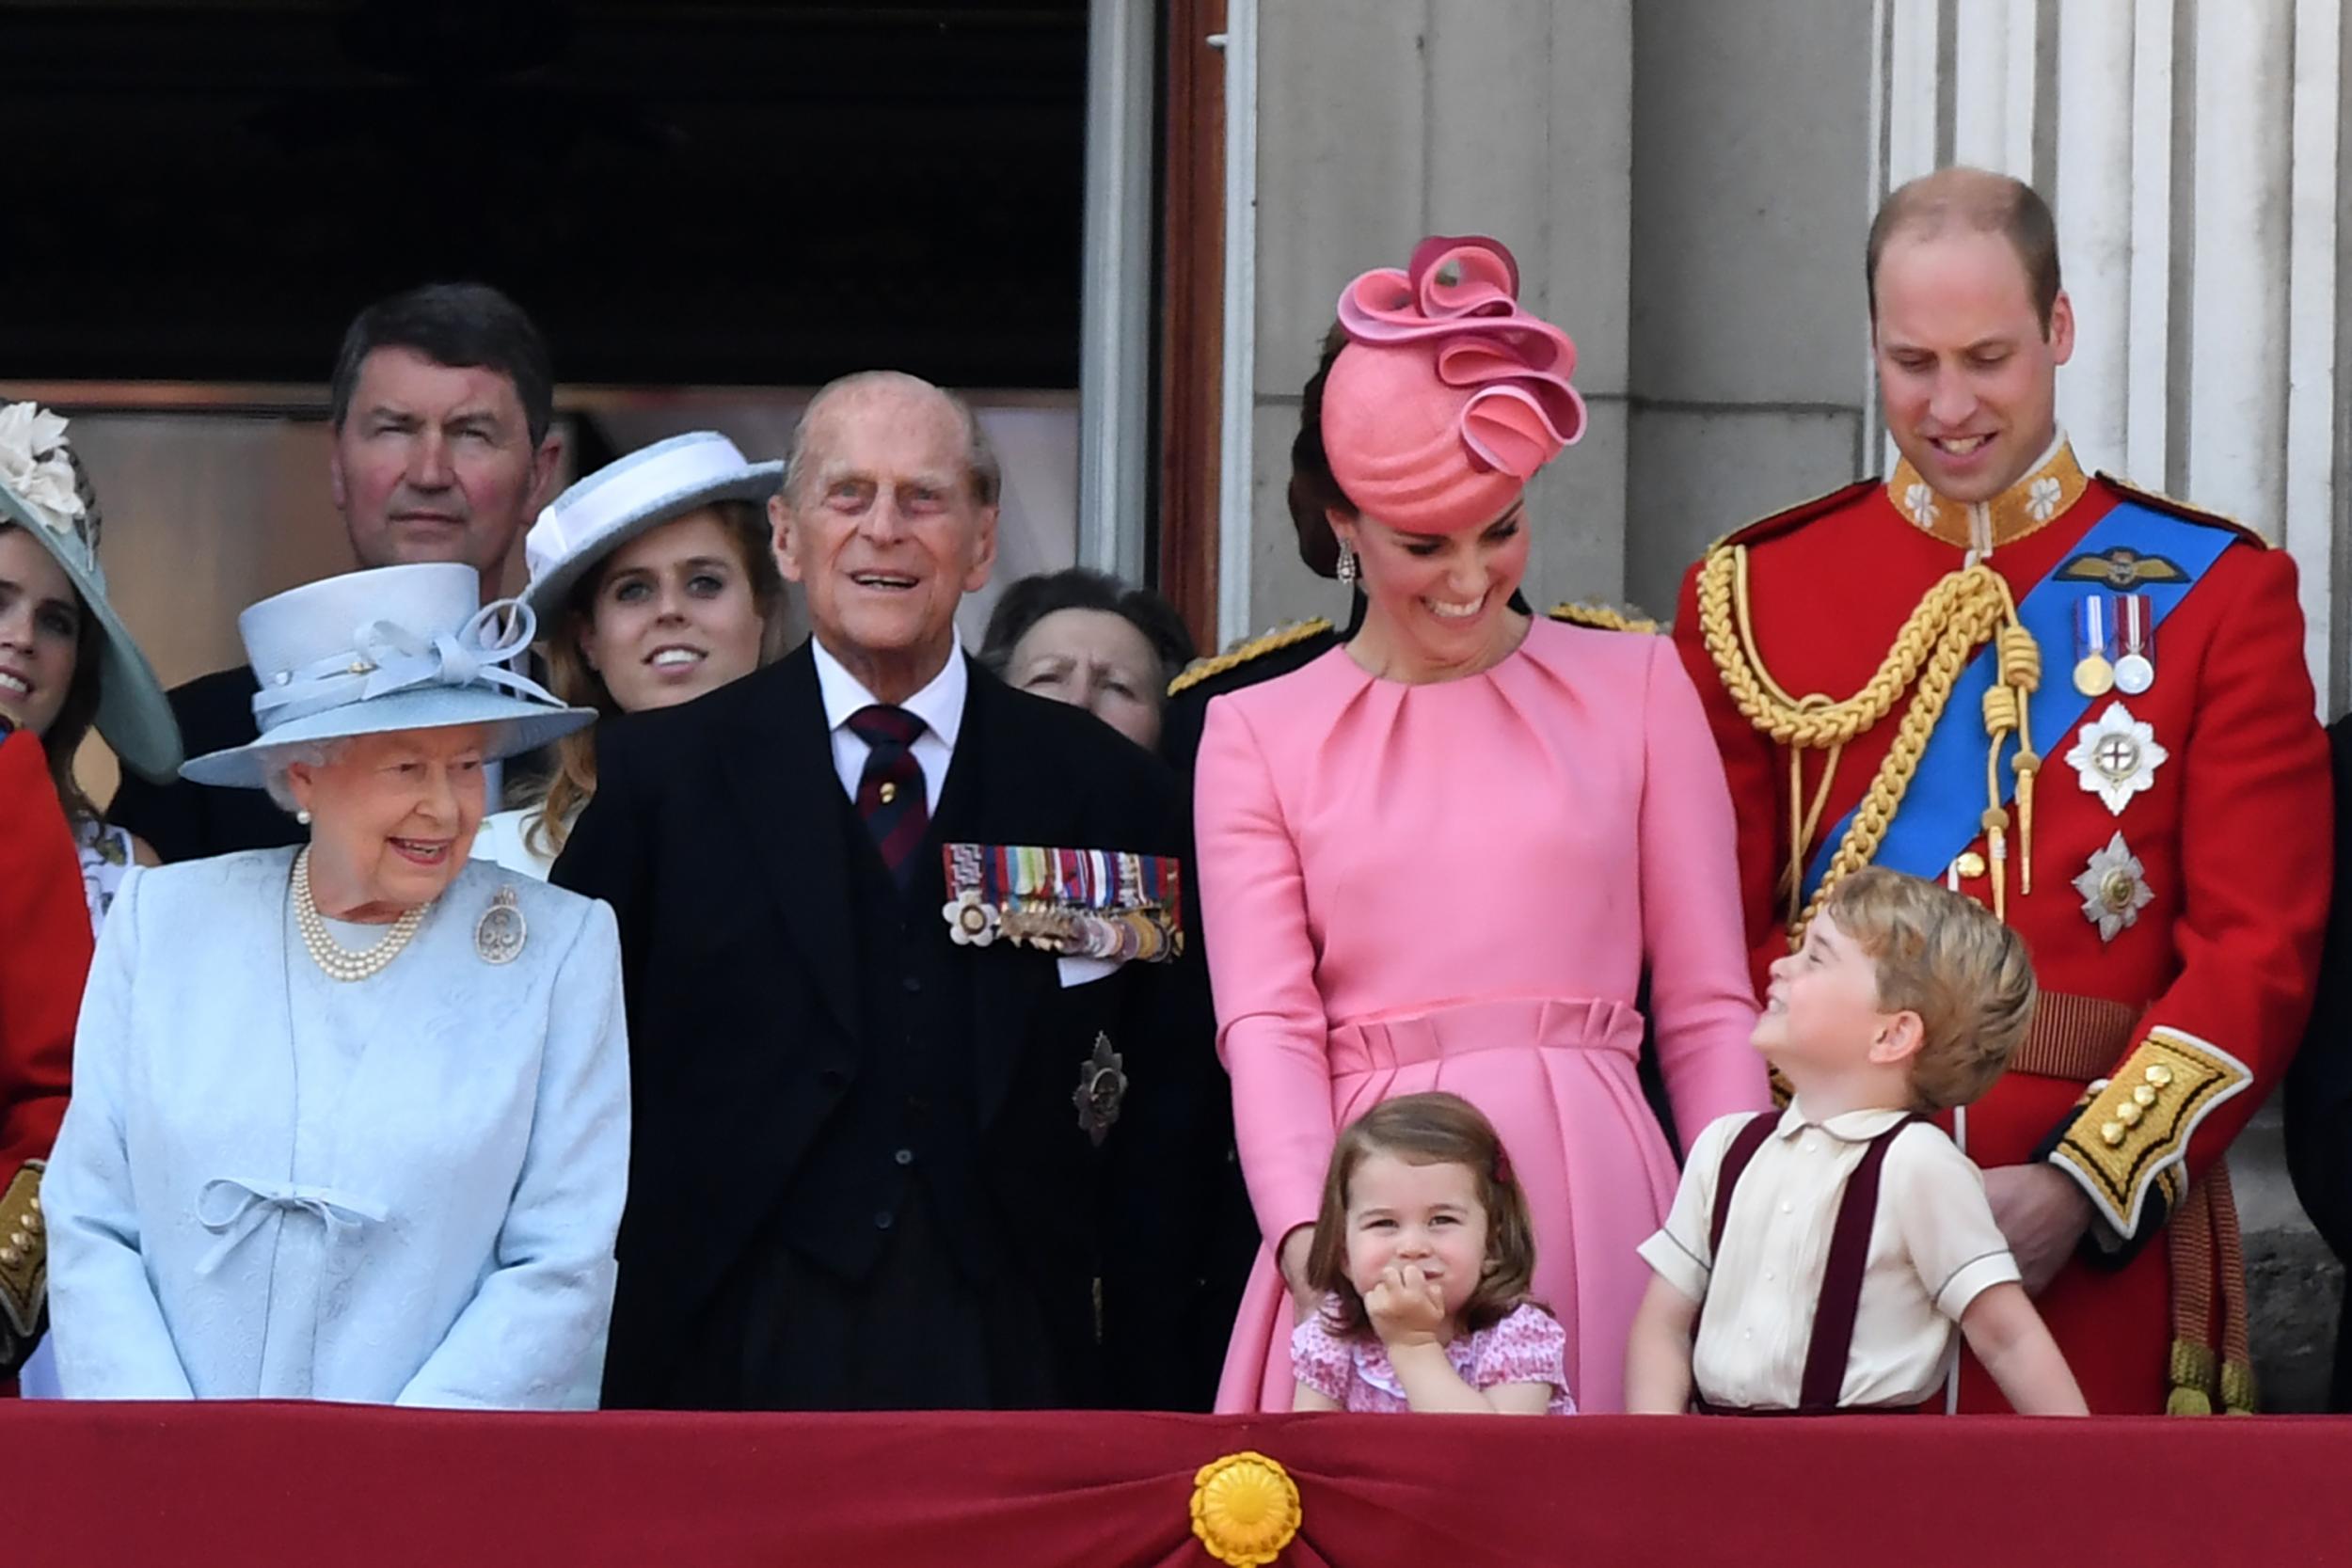 Queen Elizabeth II pictured with Prince Philip, the Duke and Duchess of Cambridge, Prince George and Princess Charlotte.